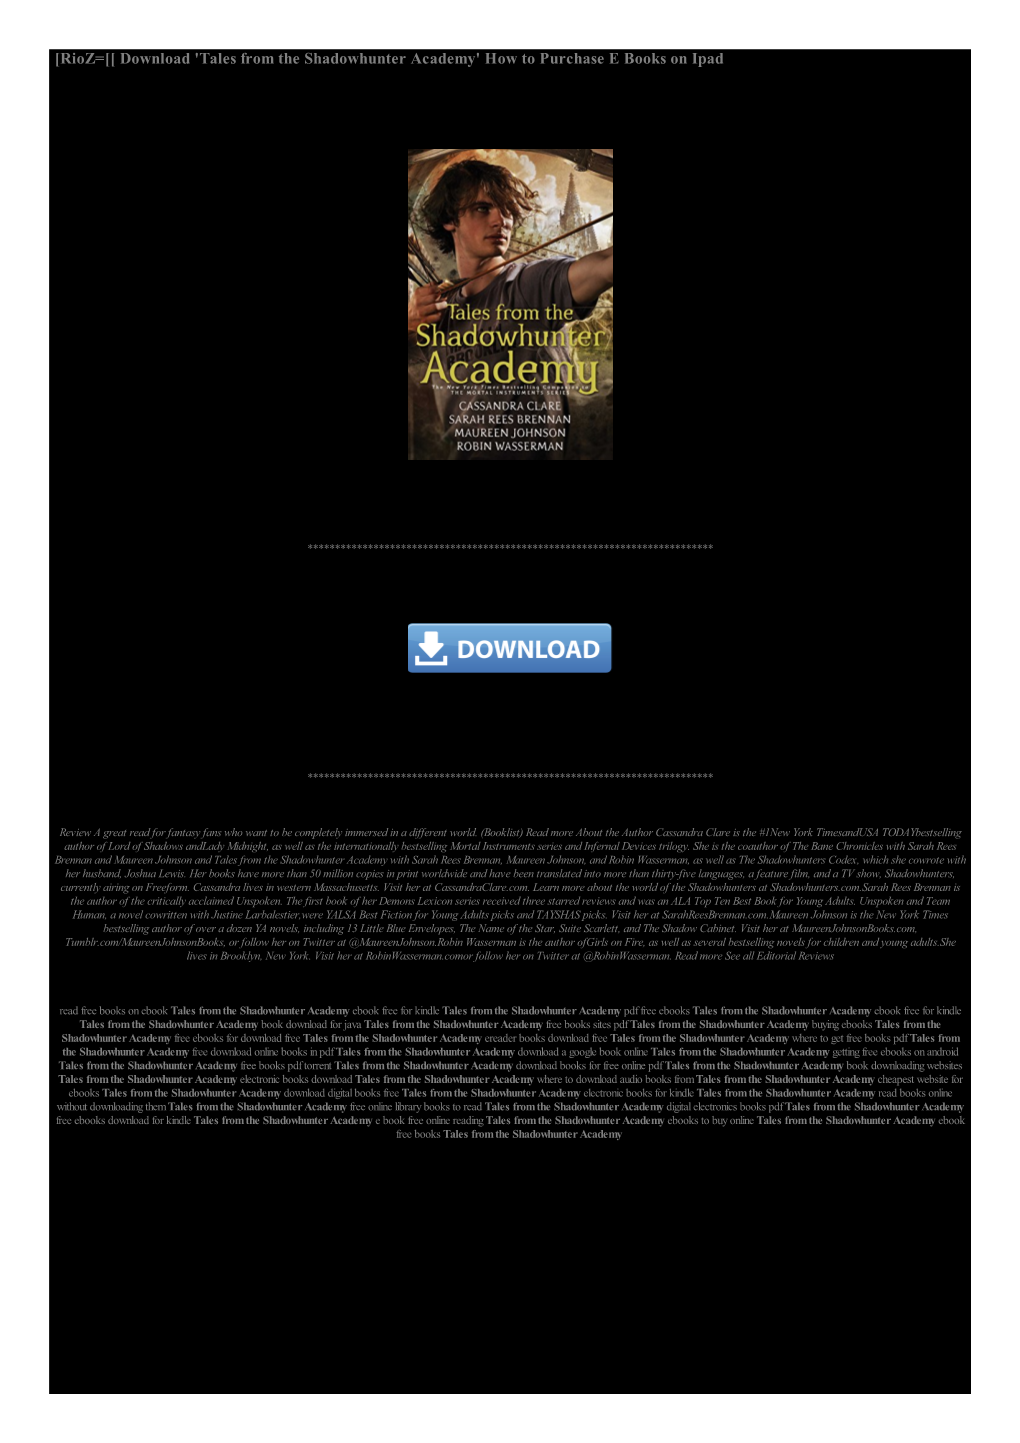 [Rioz=[[ Download 'Tales from the Shadowhunter Academy' How to Purchase E Books on Ipad